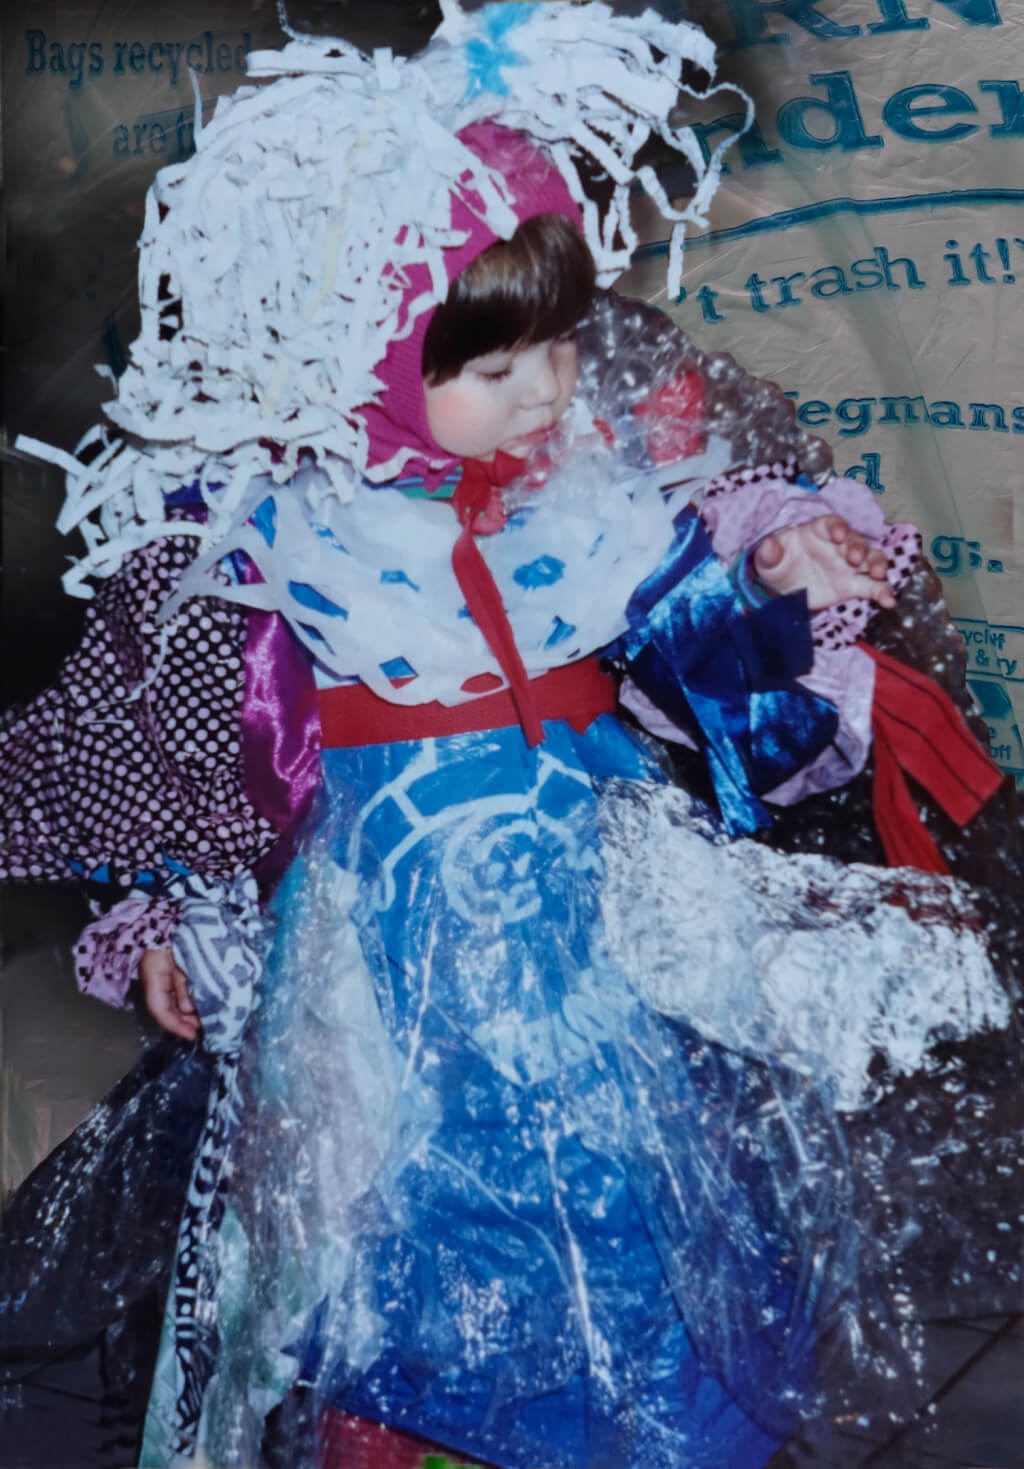 In Photoshop, Robin Botie of Ithaca, New York, restores a picture of three-year-old Marika Warden as a garbage monster, wearing a dress made of plastic bags.